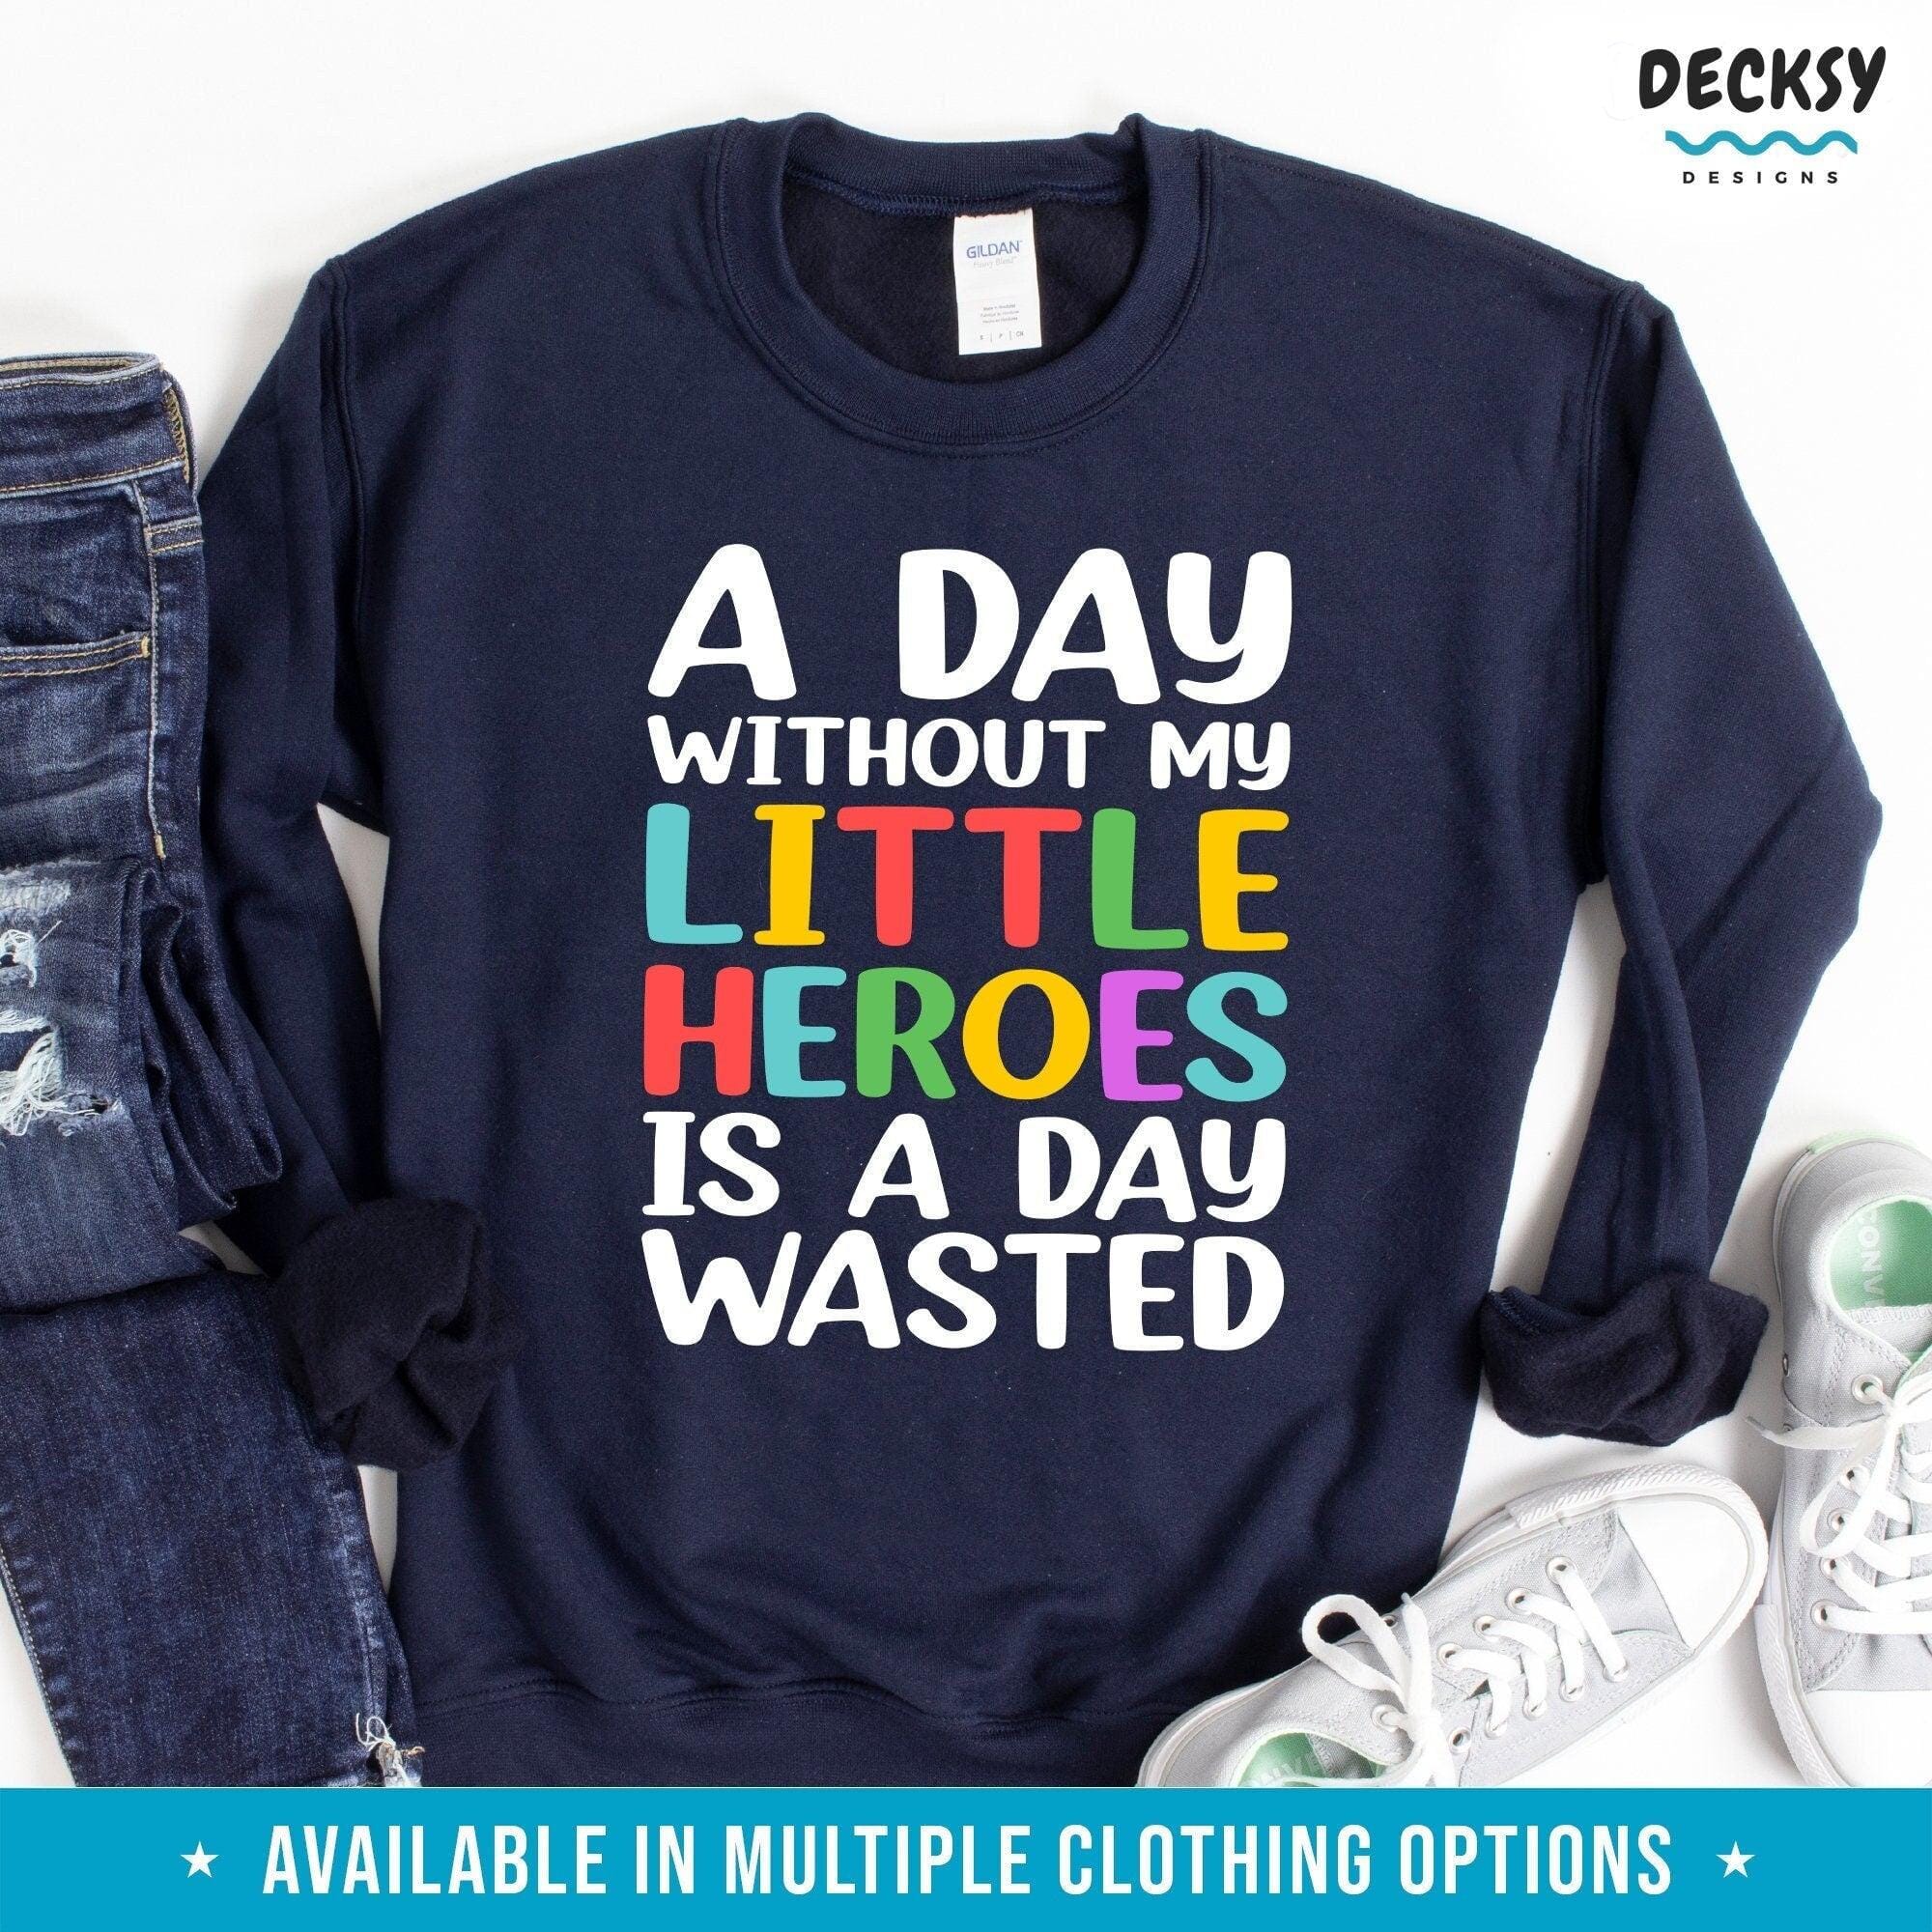 Teacher Shirtr, Childcare Educator Gift-Clothing:Gender-Neutral Adult Clothing:Tops & Tees:T-shirts:Graphic Tees-DecksyDesigns